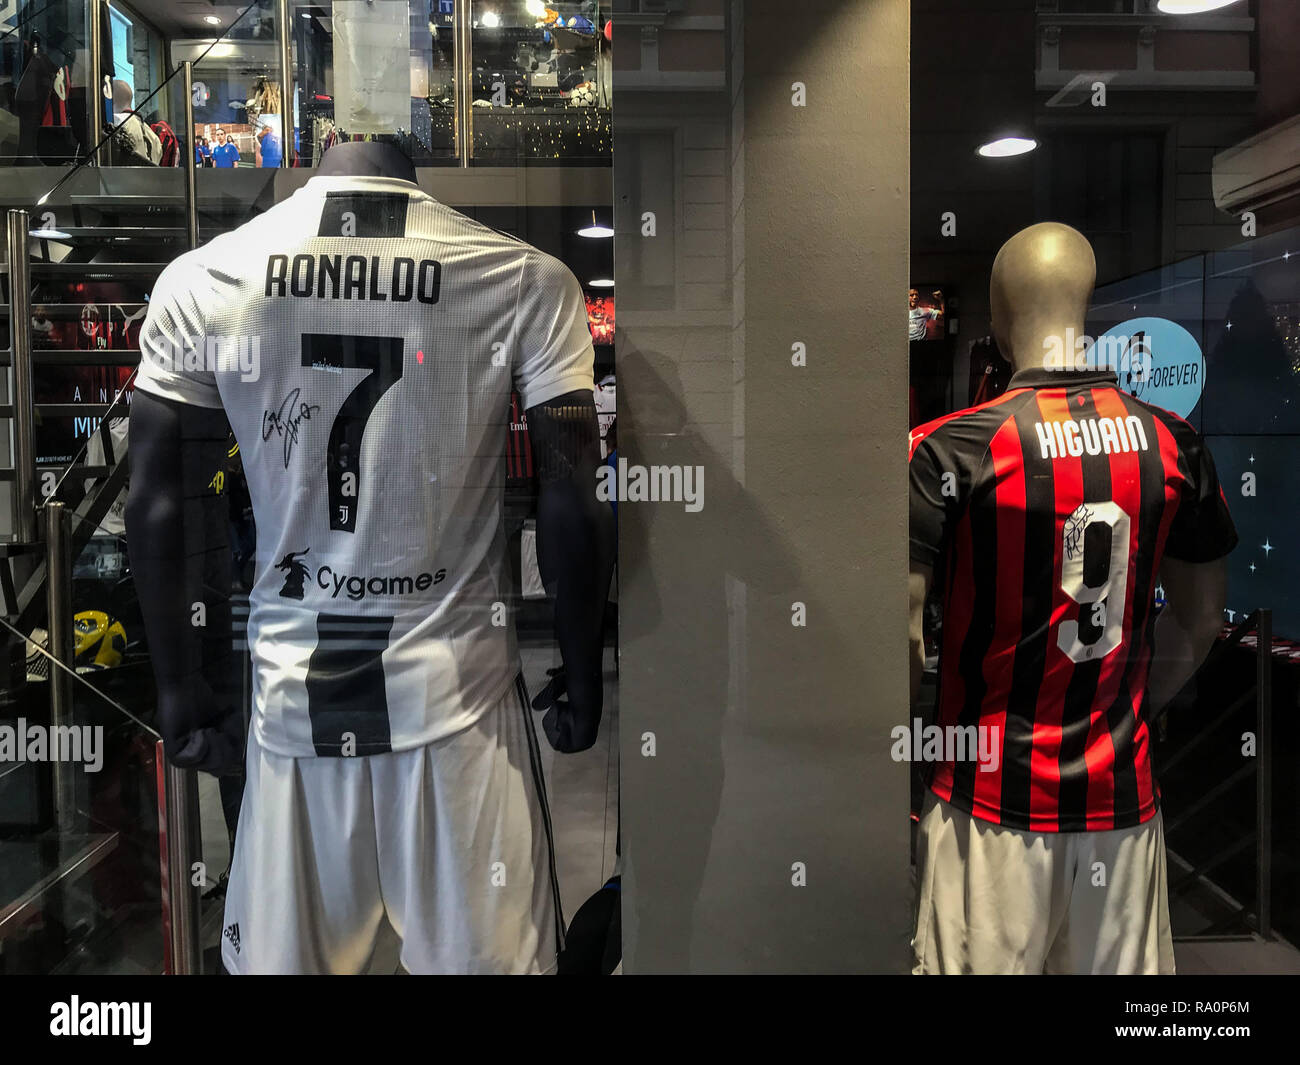 The t-shirt of Ronaldo and Gonzalo Higuain are shown in a football shop in Milano Stock Photo